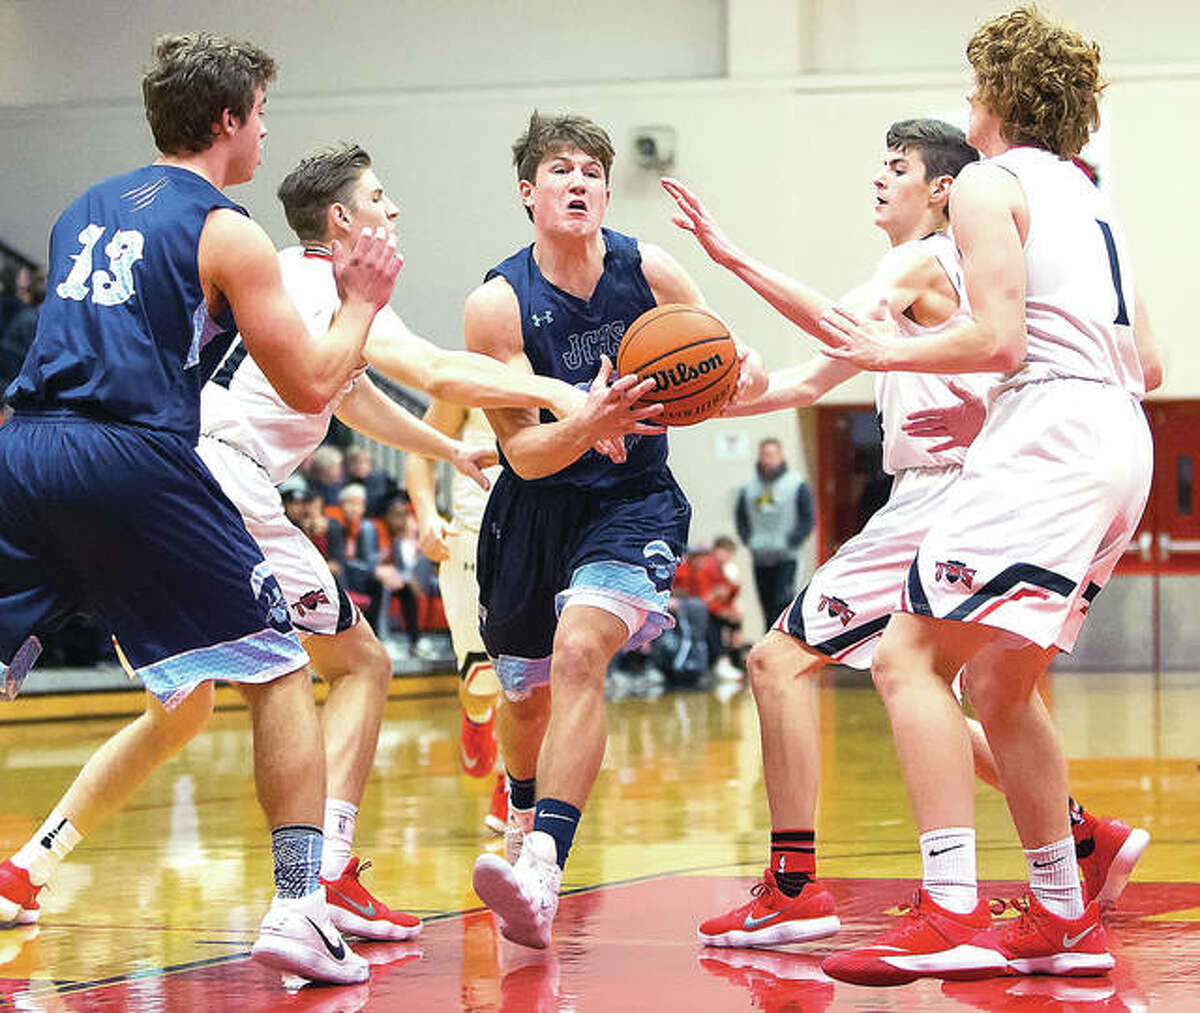 Jersey’s Blake Wittman (middle) splits Triad’s defense to drive the lane while teammate Lucas Ross (13) looks on during Friday night’s Mississippi Valley Conference boys basketball game at Triad.